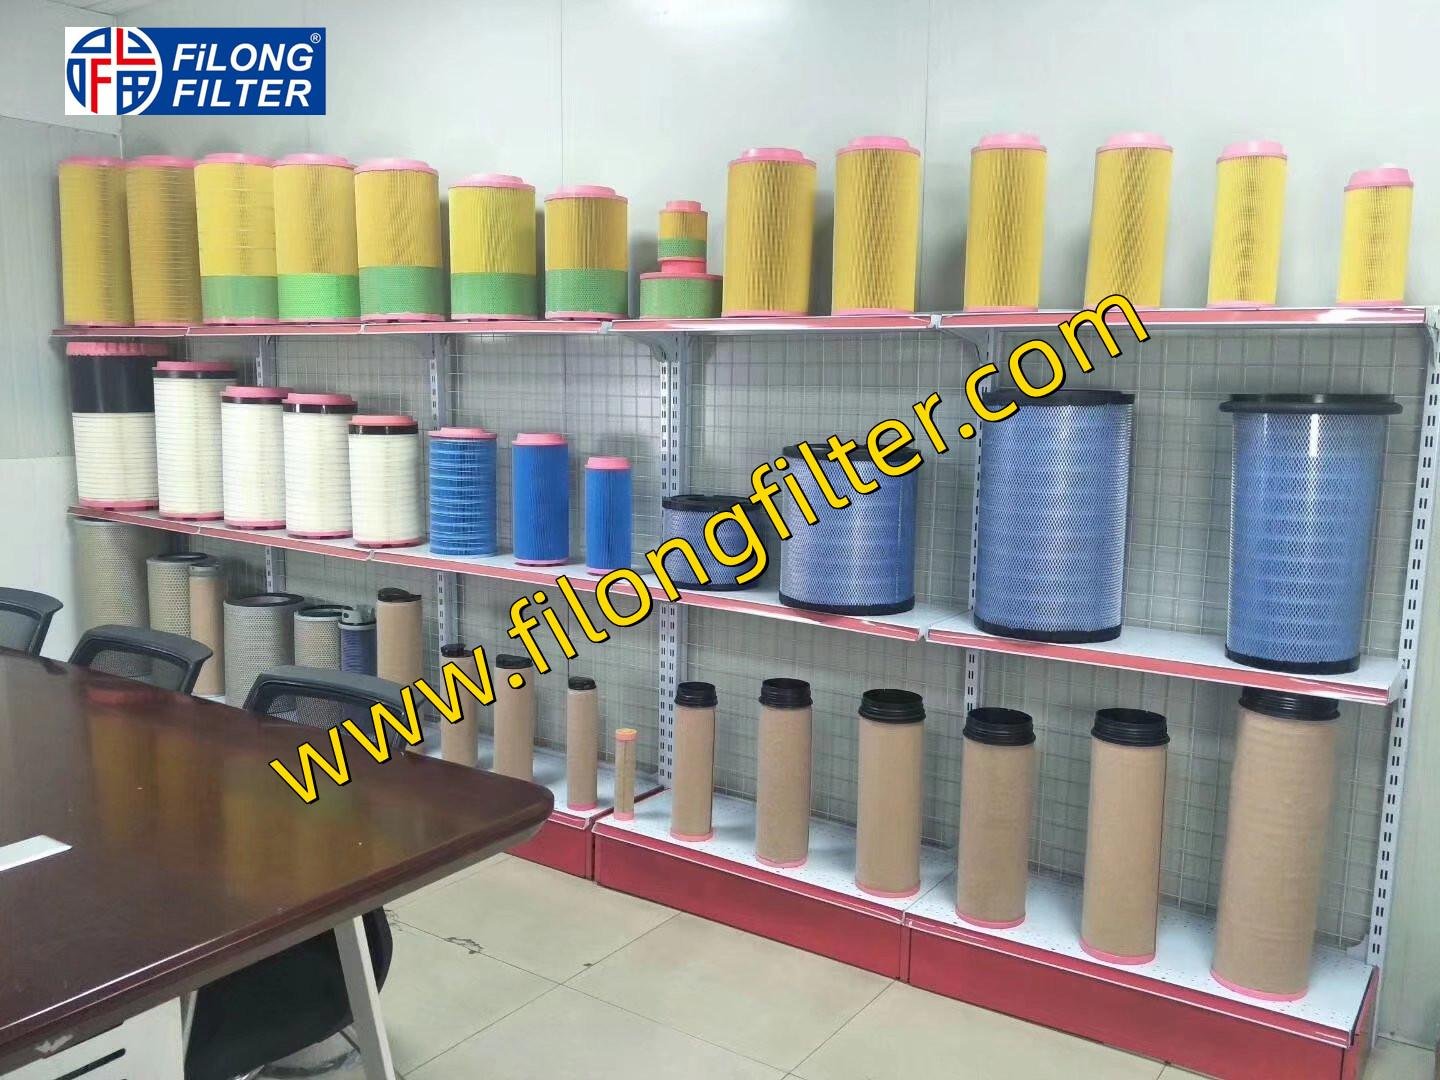 FILONG hydraulic filter Manufacturers in China, truck filters manufactory in china , hydraulic filter manufactory in china , truck parts supplier in china